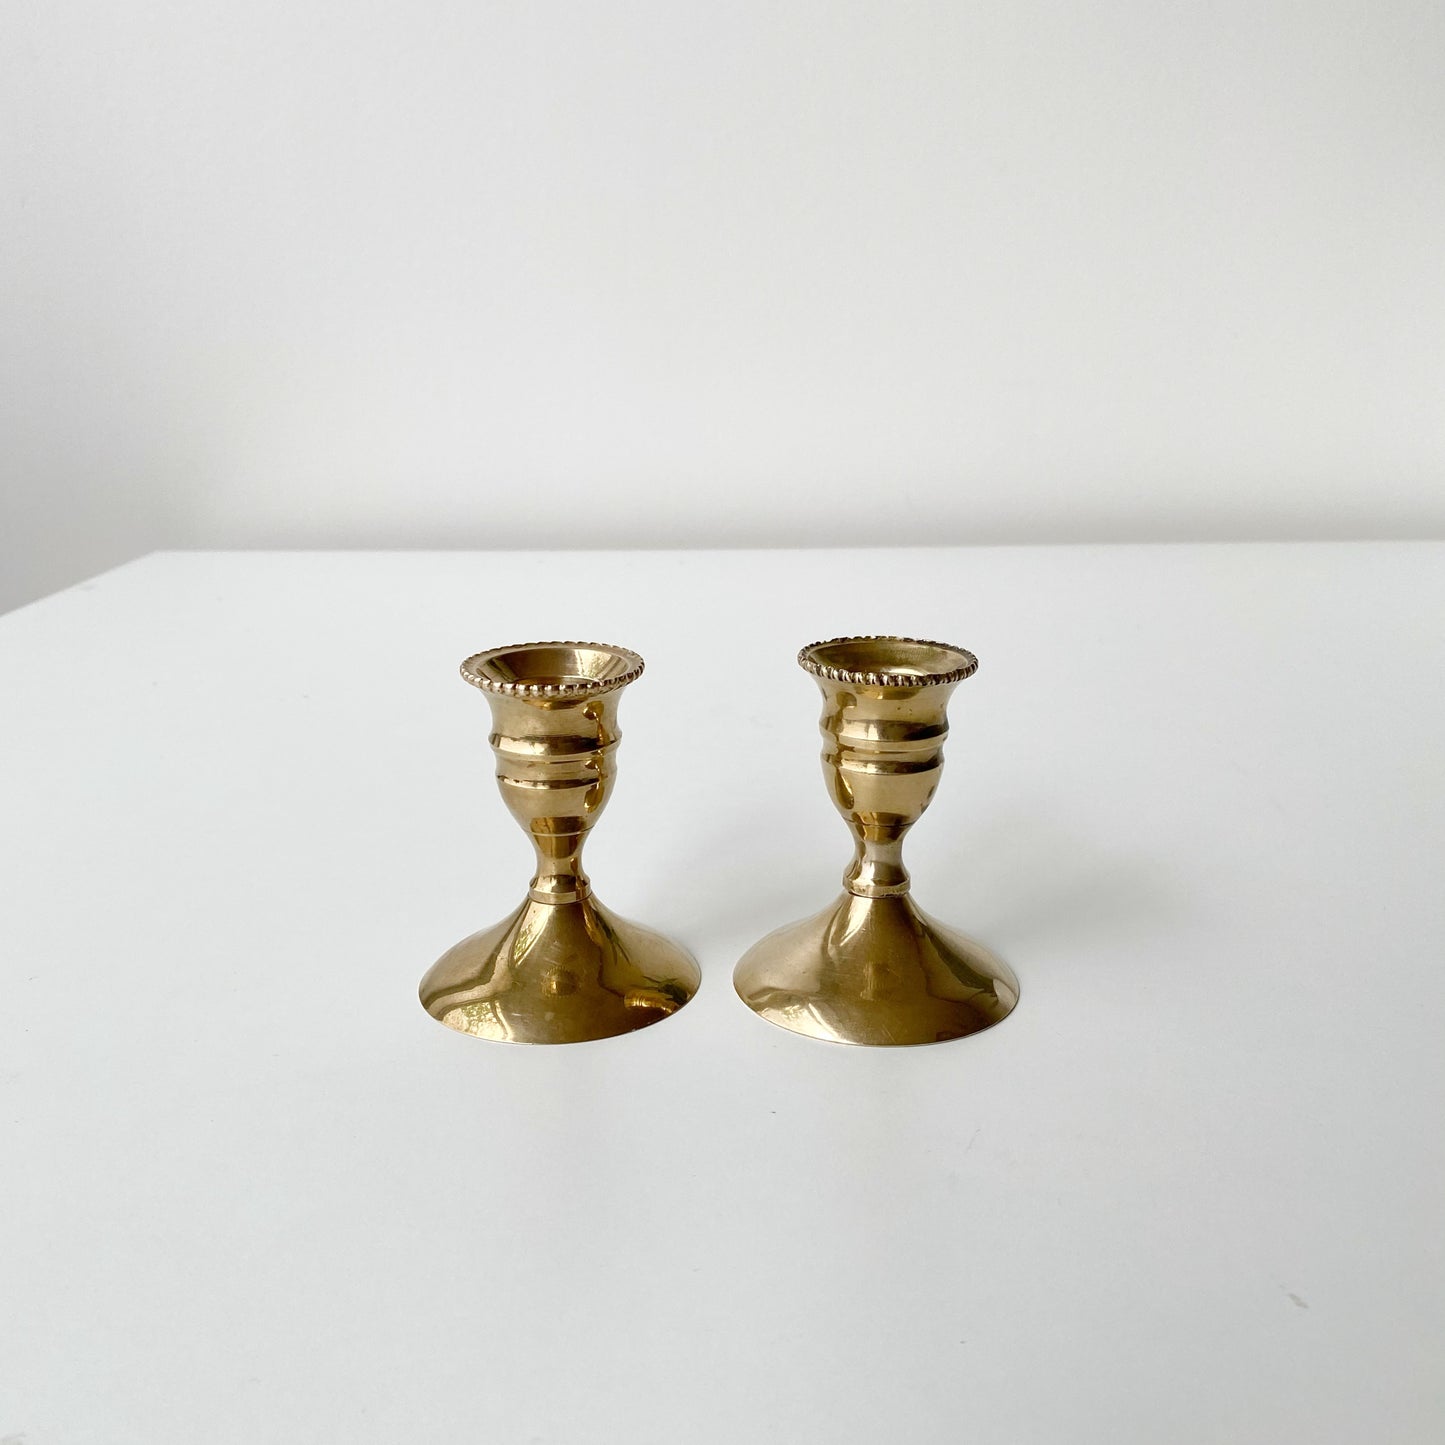 Pair of Vintage Solid Brass Candle Holders